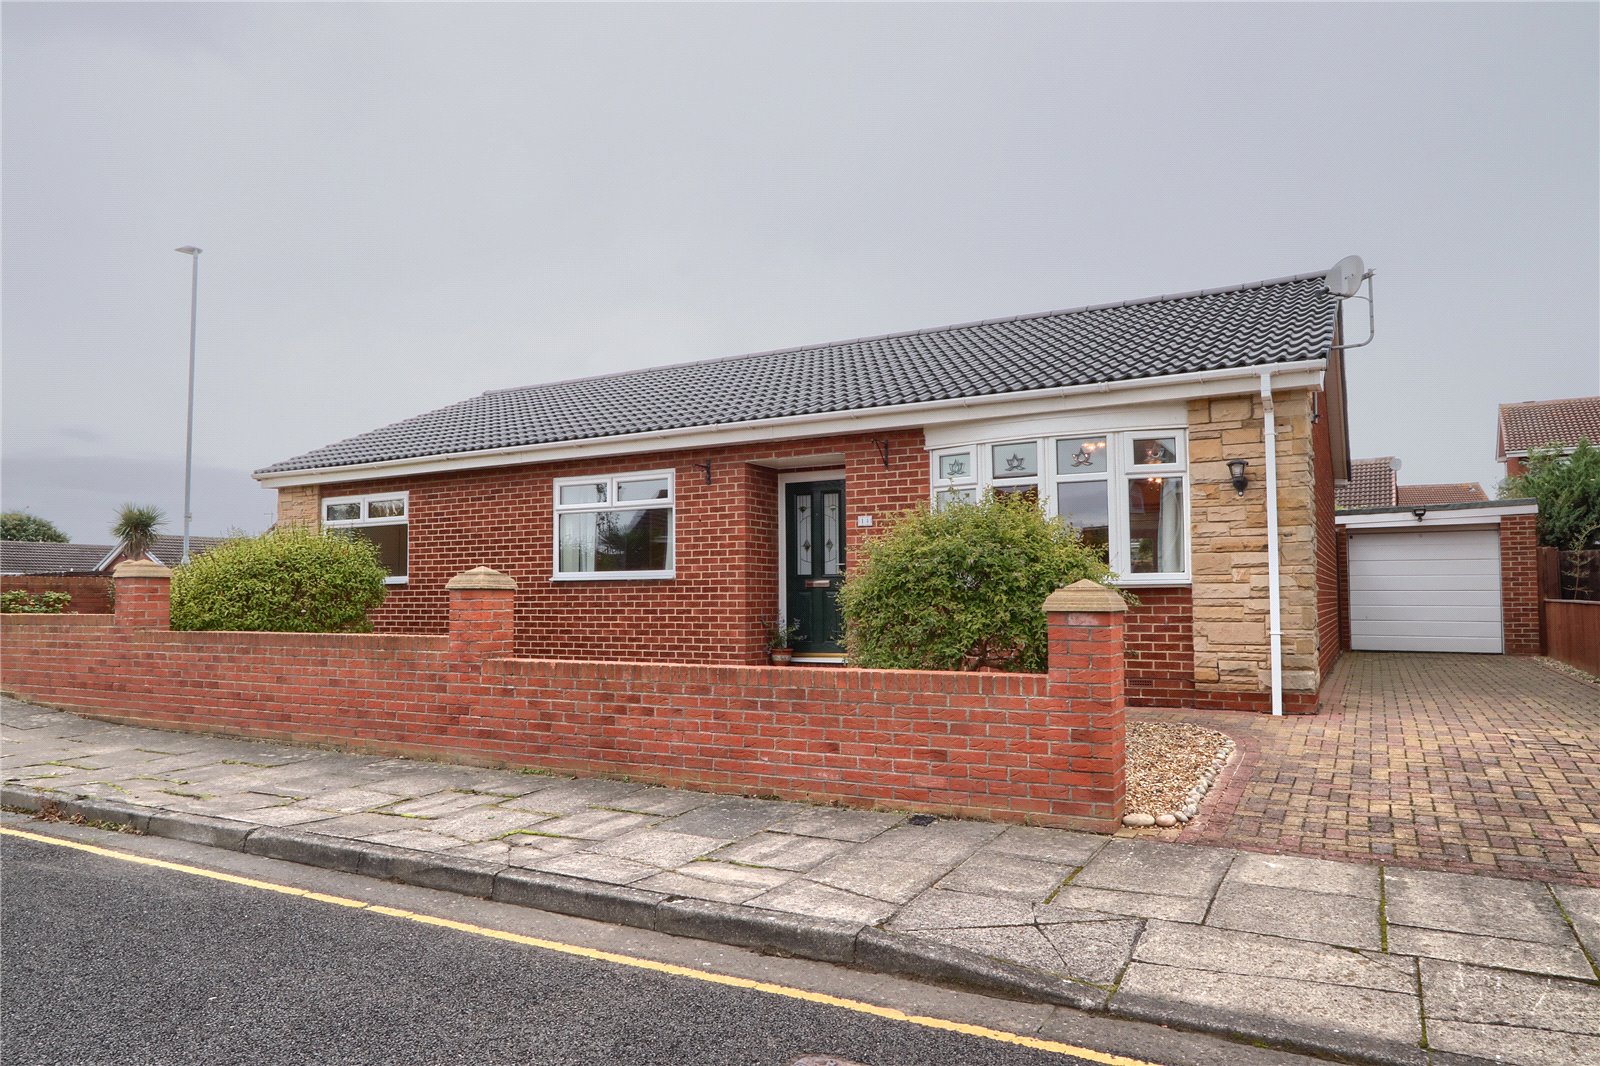 3 bed bungalow for sale in Dillside, Elm Tree 1